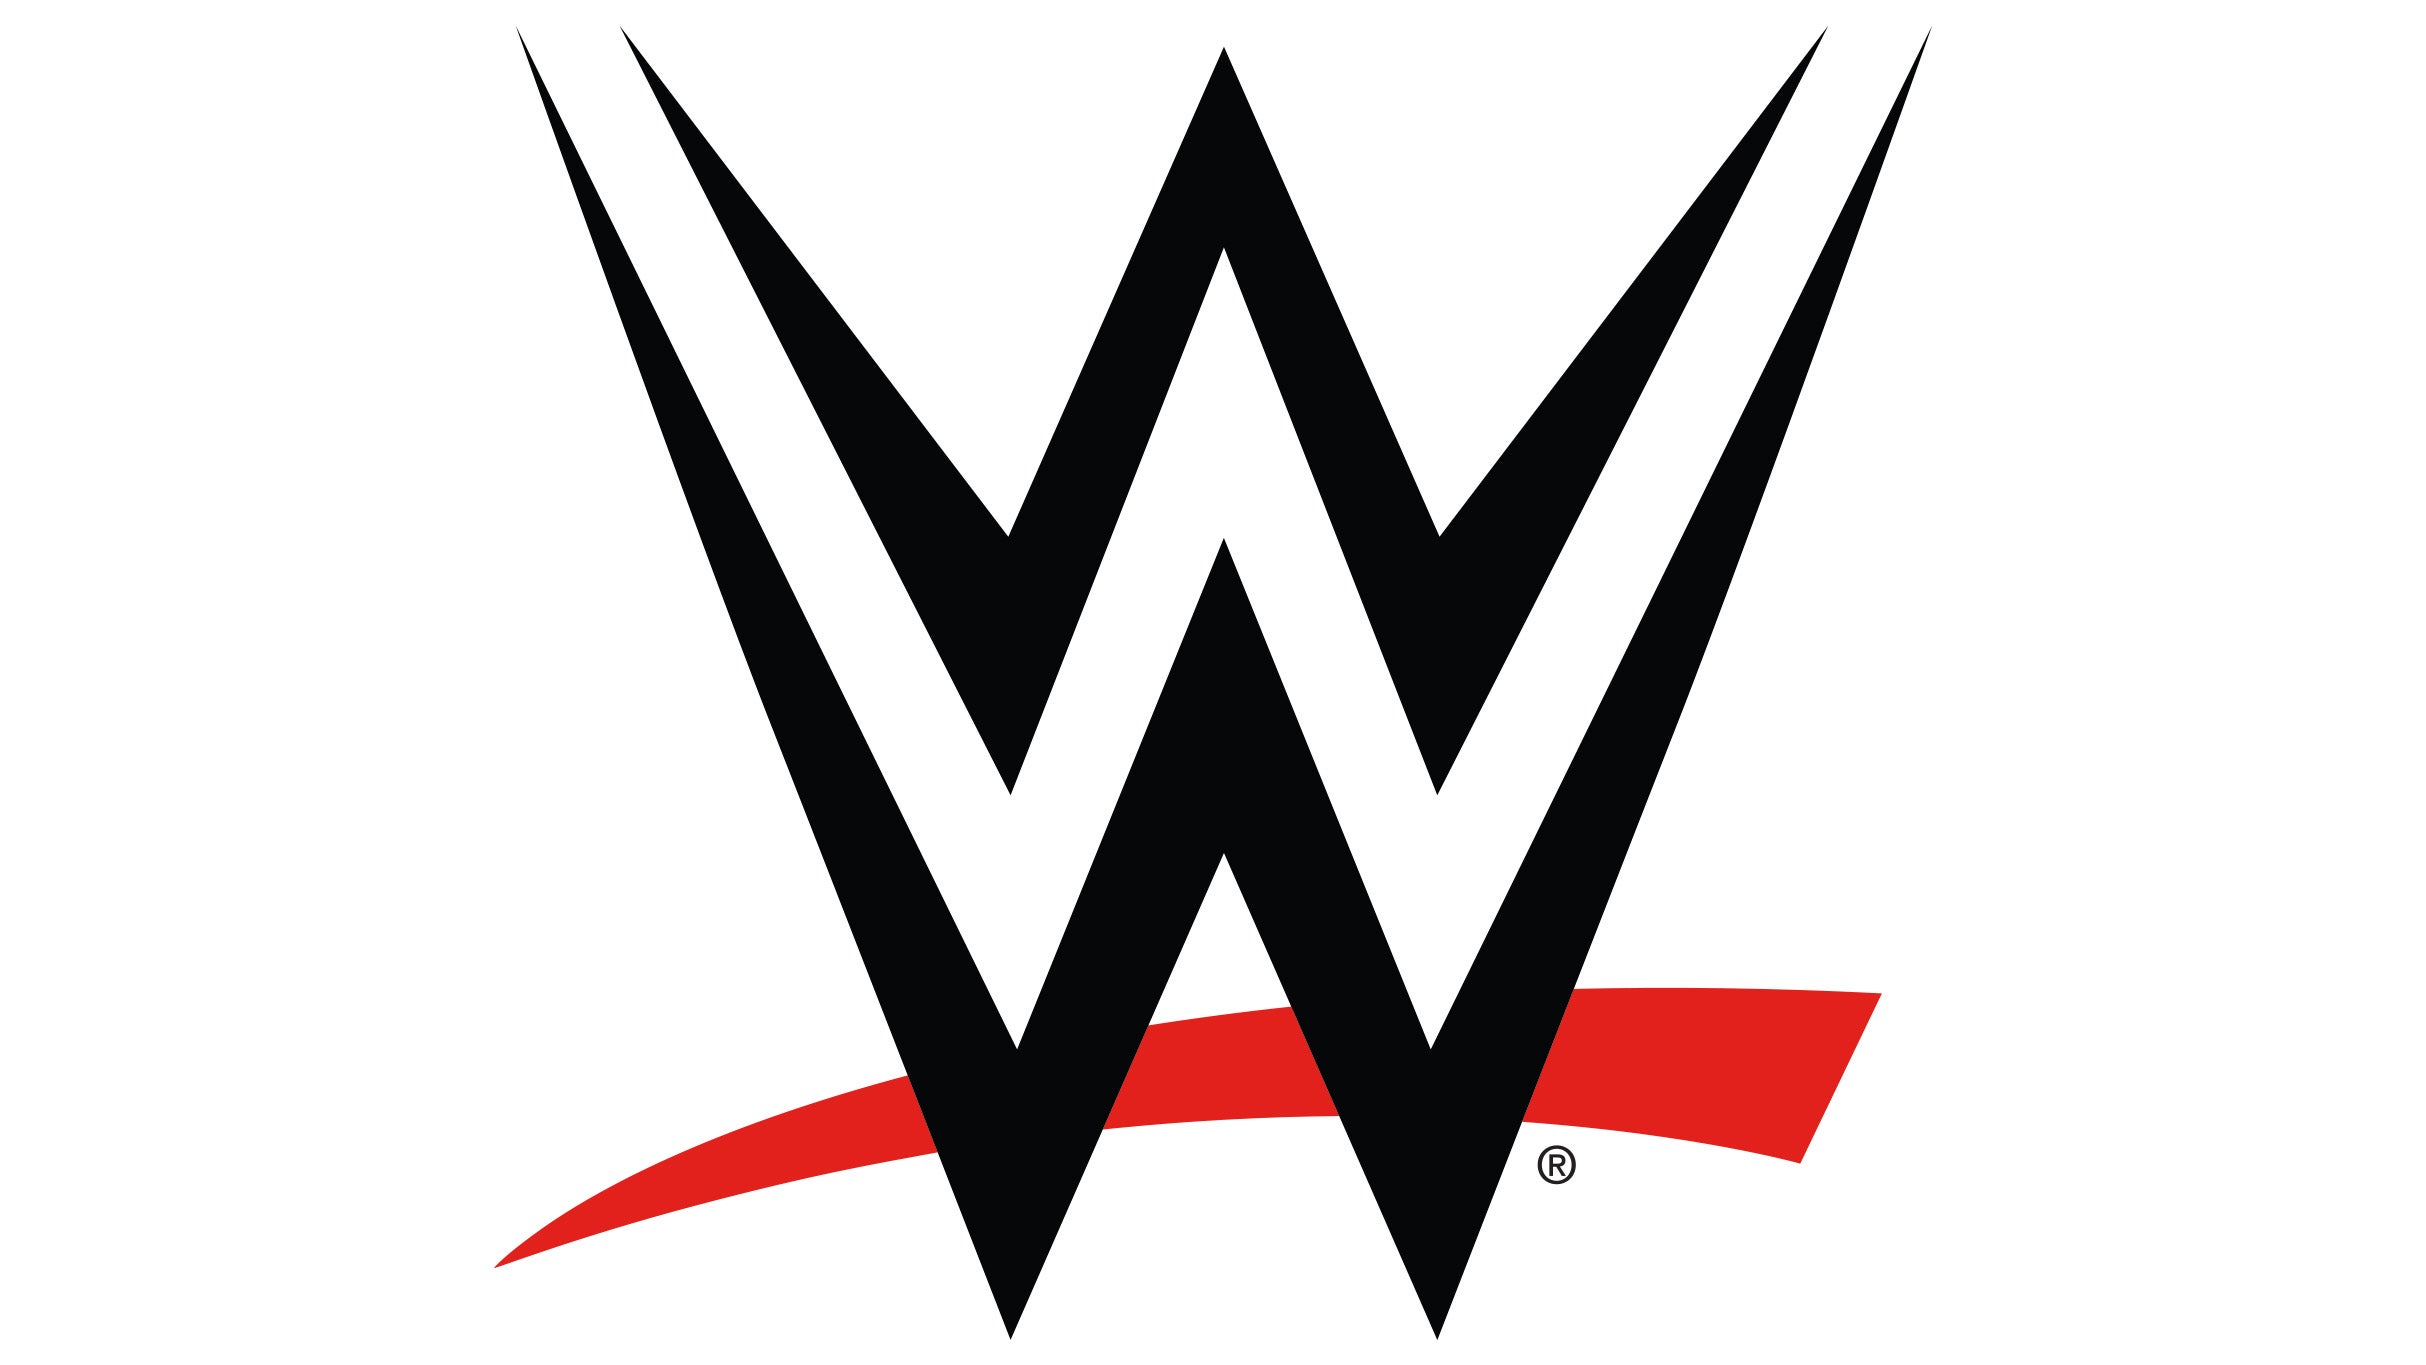 working presale password to WWE Road To Wrestlemania face value tickets in Sioux Falls at Denny Sanford PREMIER Center